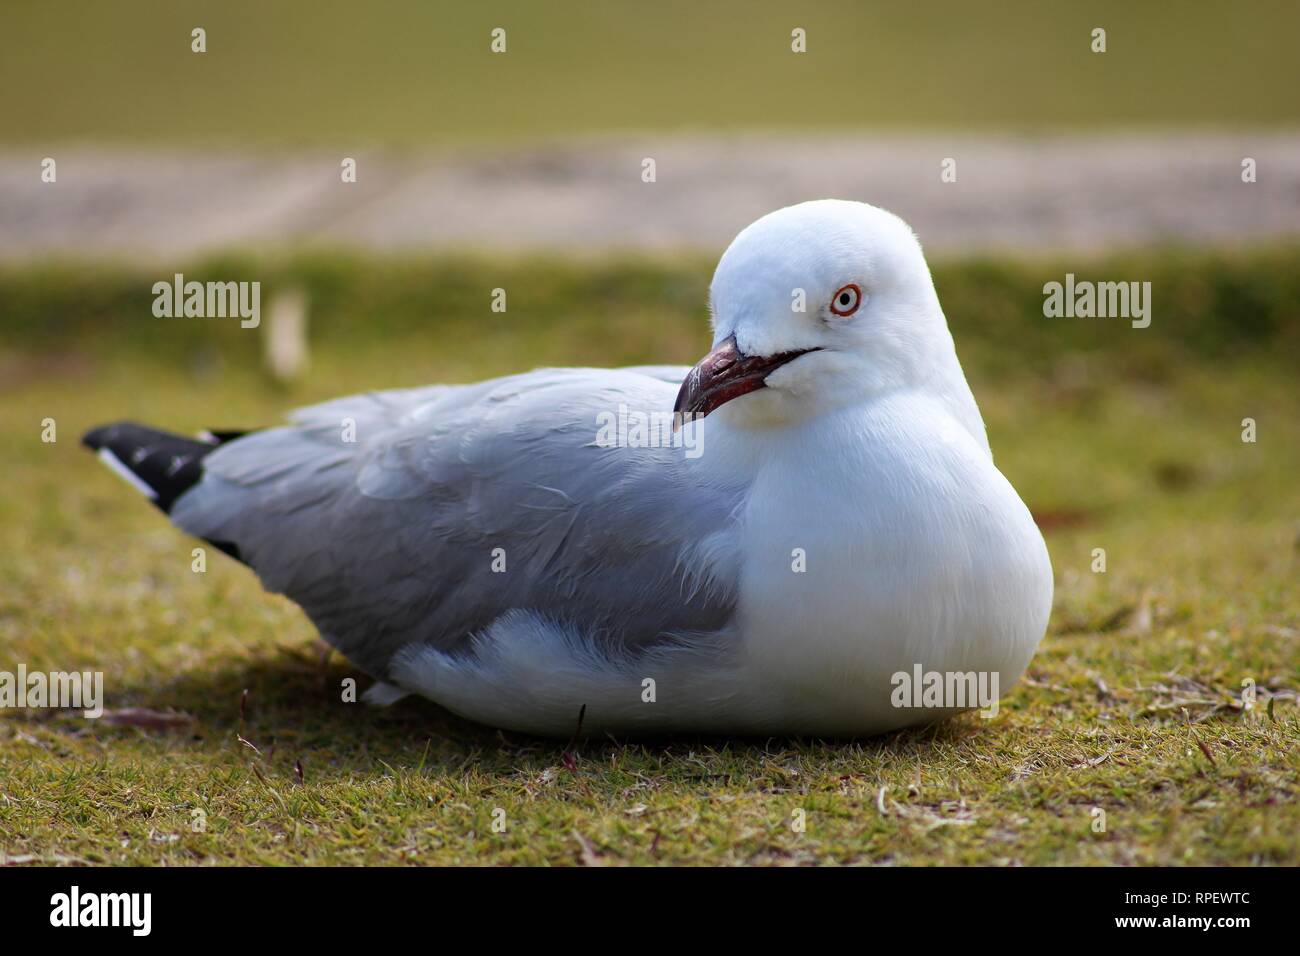 A seagull sitting on a green grass patch in a park by the coast Stock Photo